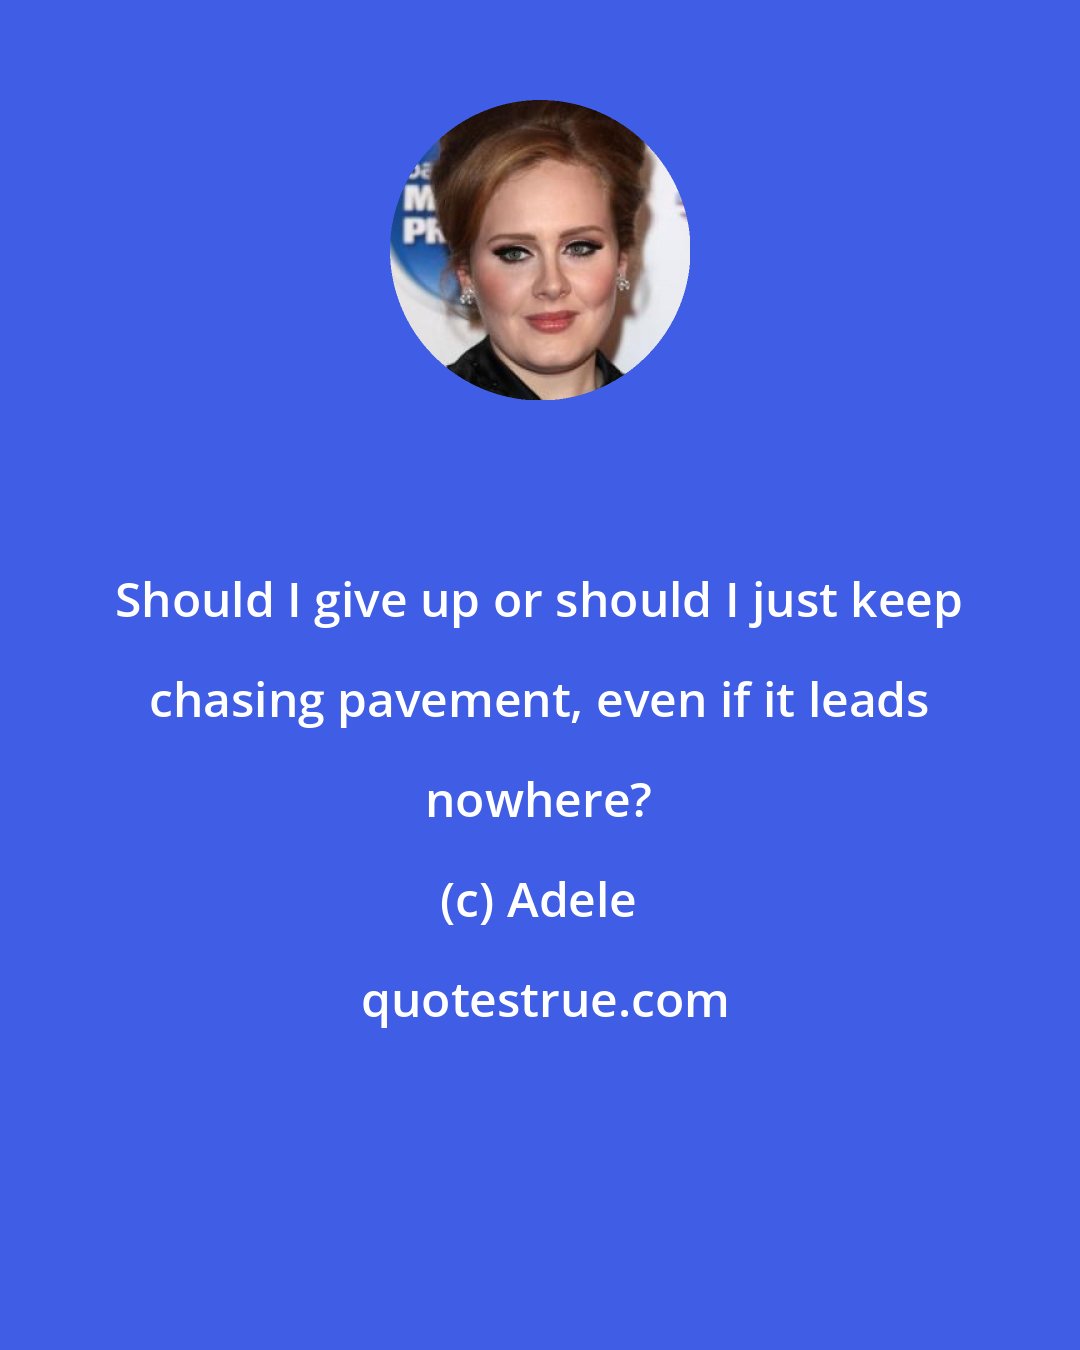 Adele: Should I give up or should I just keep chasing pavement, even if it leads nowhere?